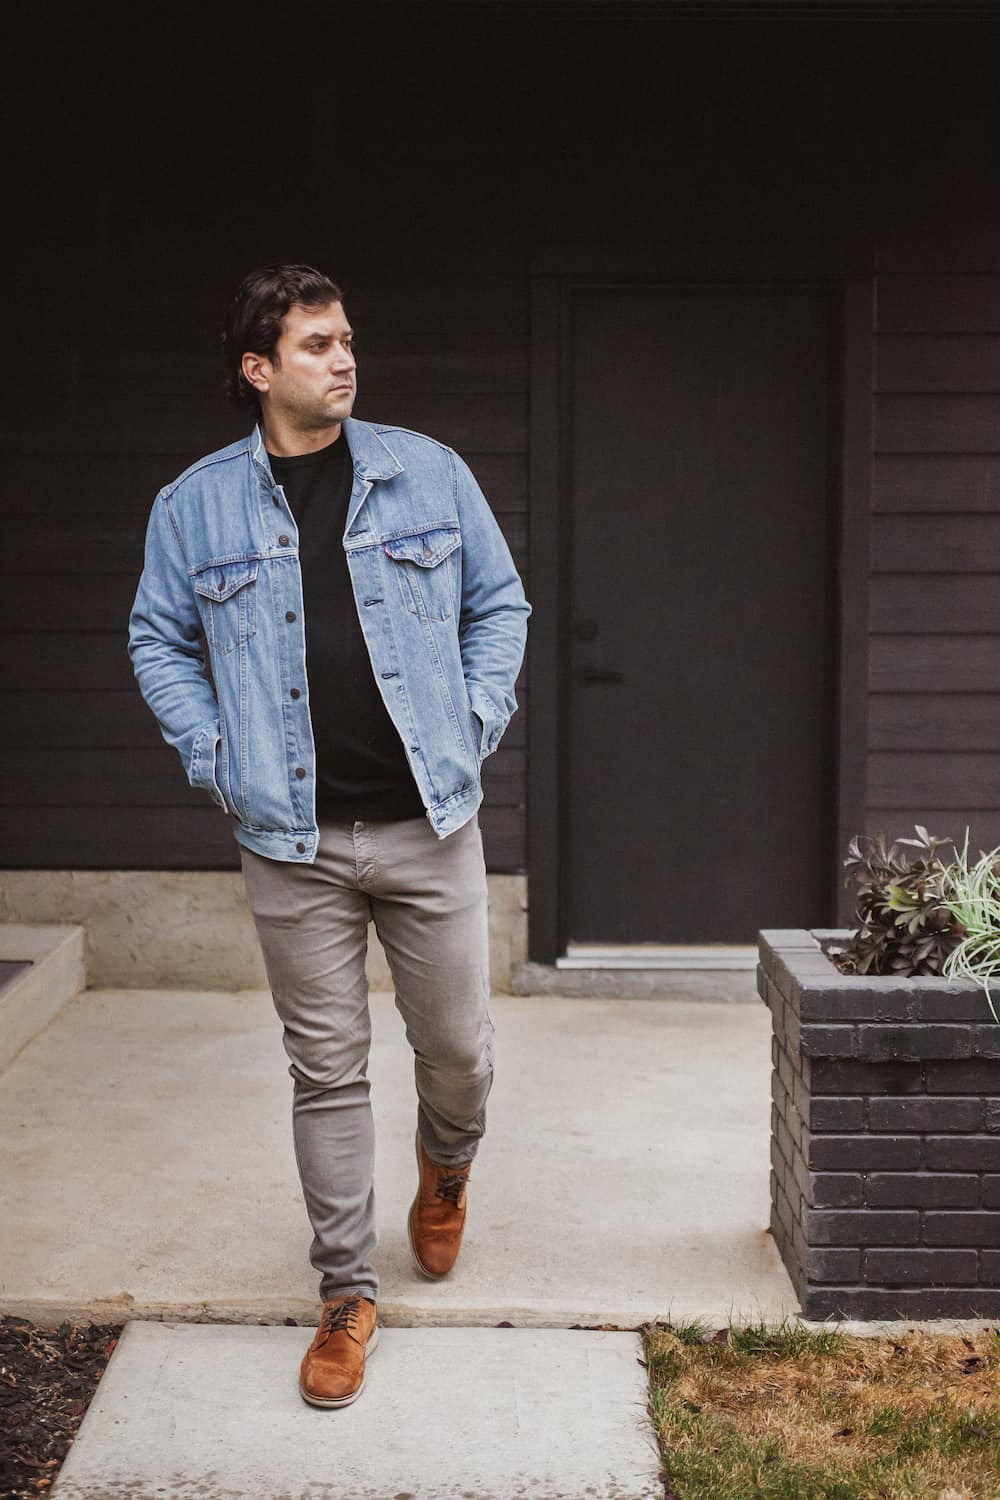 image of a man wearing a denim jacket, black t-shirt, grey chino pants, and brown casual shoes